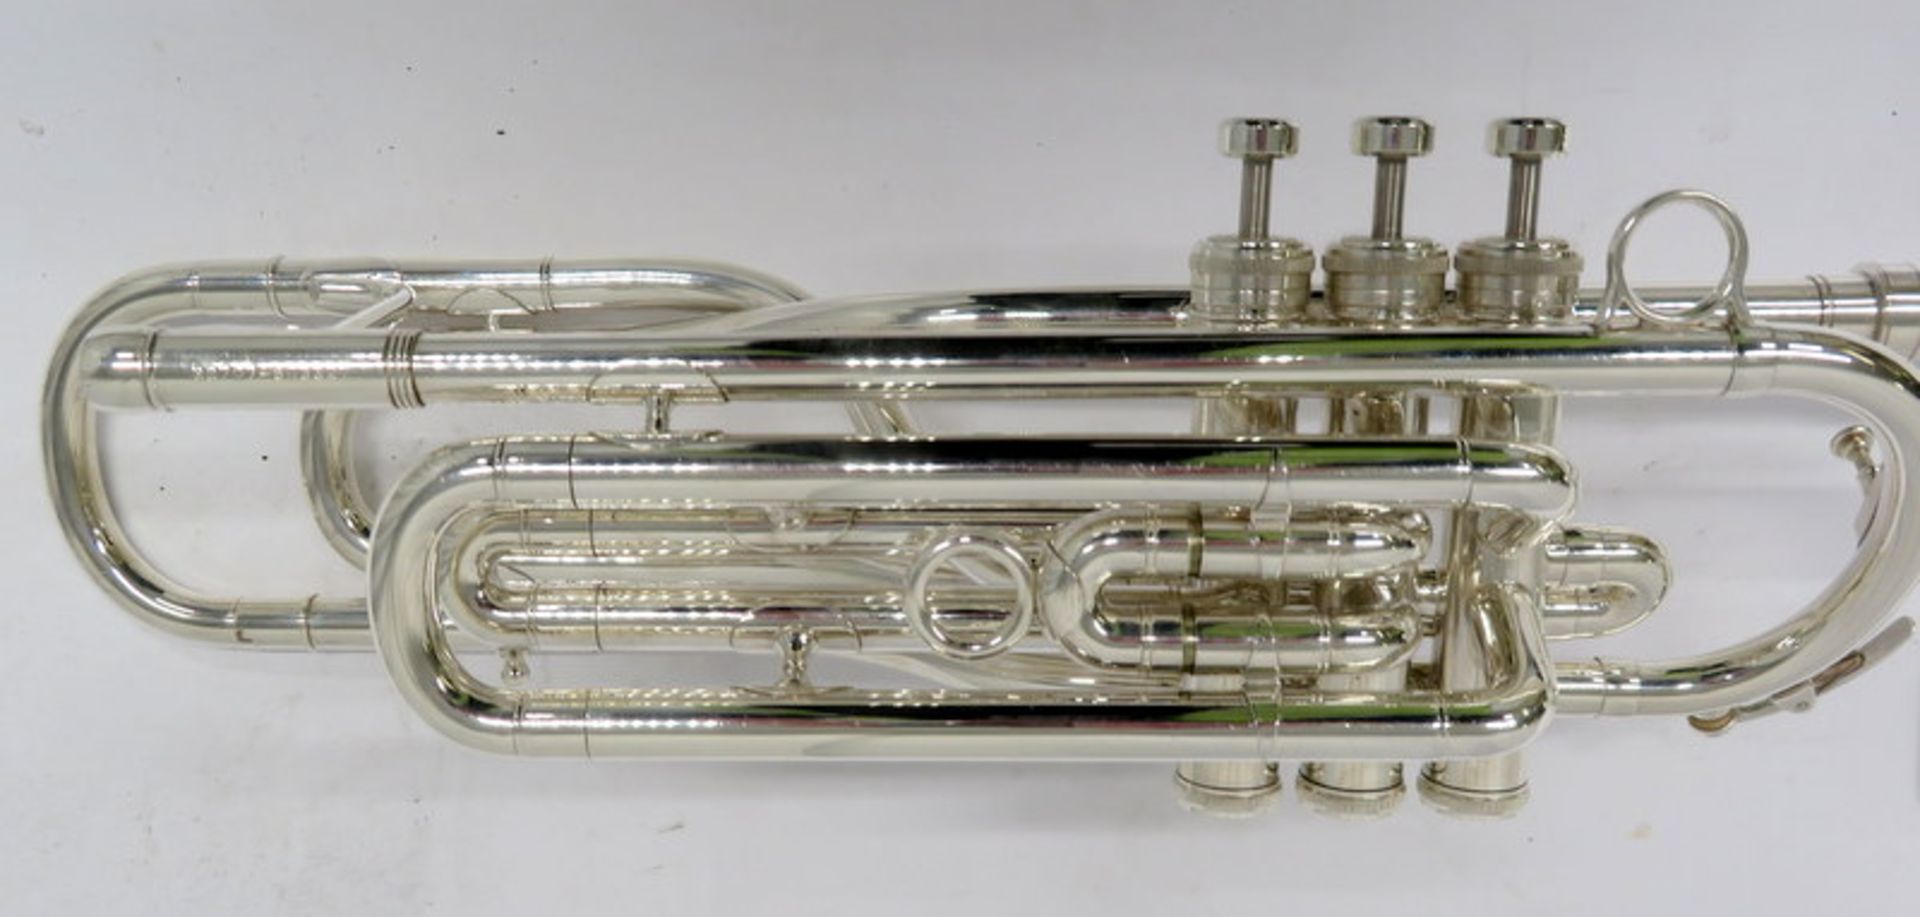 Besson International BE707 Fanfare Trumpet With Case. Serial Number: 883327. Please Note T - Image 10 of 16